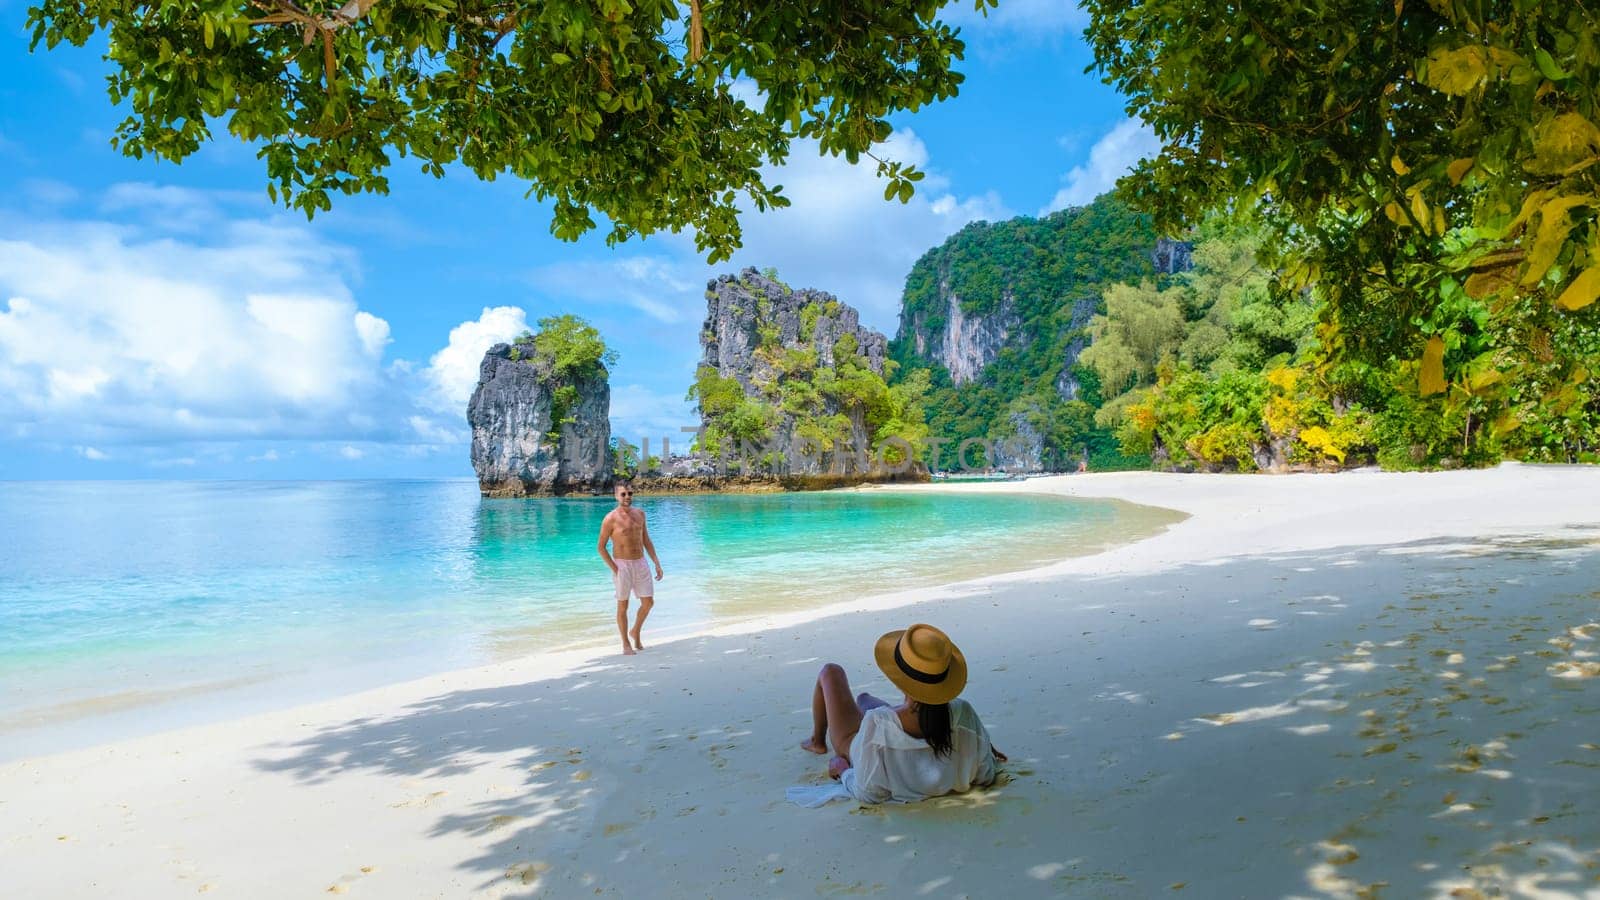 a couple of men and women on the beach of Koh Hong during vacation in Thailand, a tropical white beach with Asian women and European men in Krabi Thailand. Koh Hong Island Krabi Thailand,